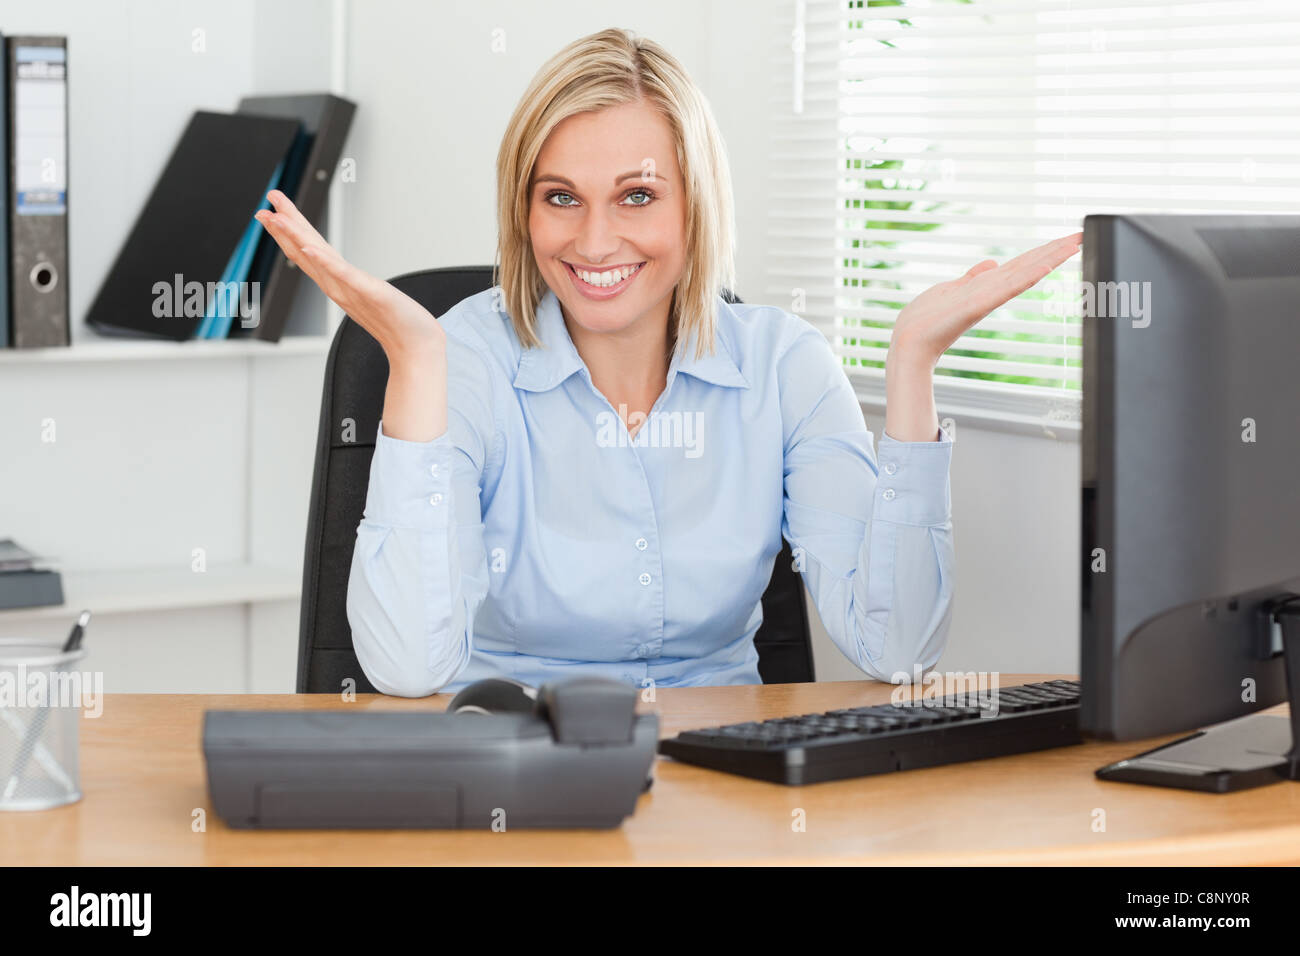 Smiling Blonde Woman Sitting Behind Desk Not Having A Clue What To